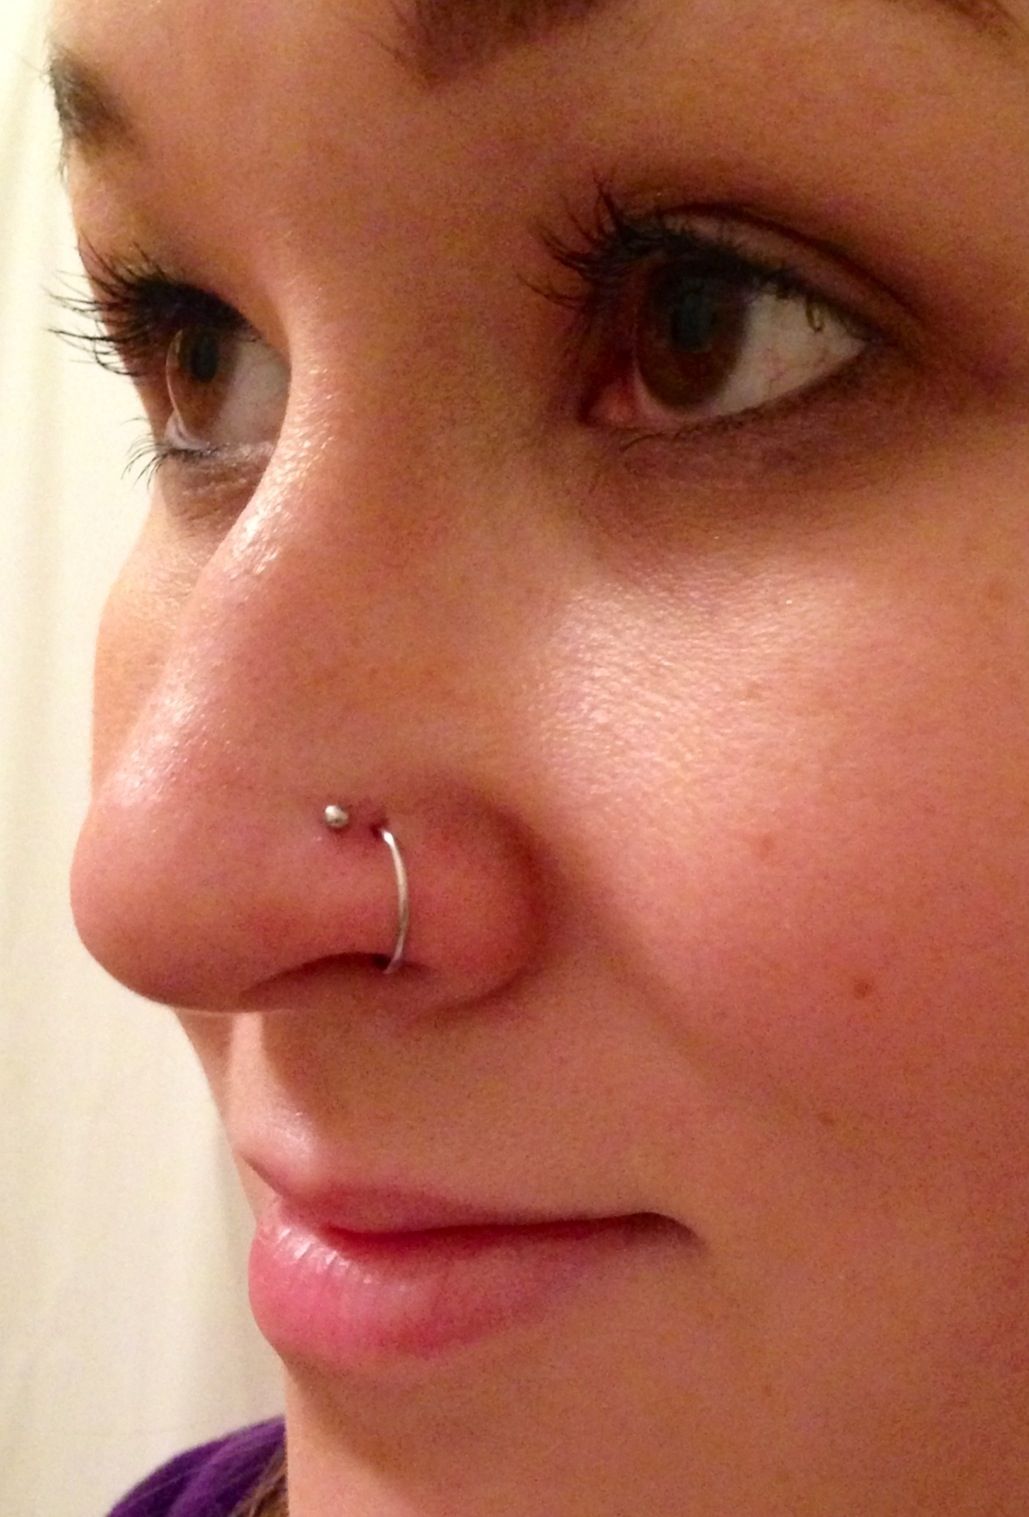 Double Nose Piercing, Stud And Hoop. (View 13 of 15)